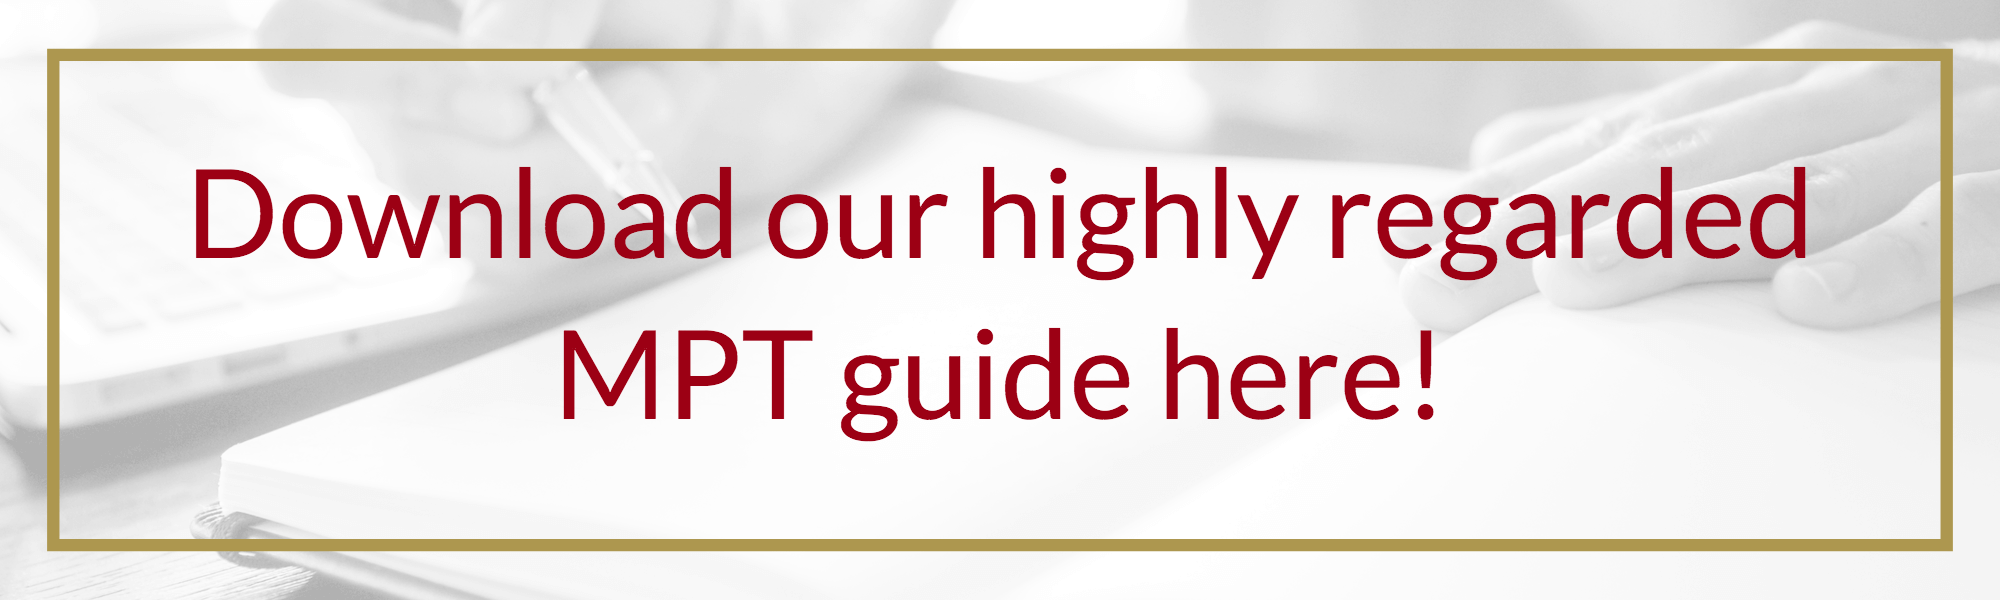 mpt guide, multistate performance test guide